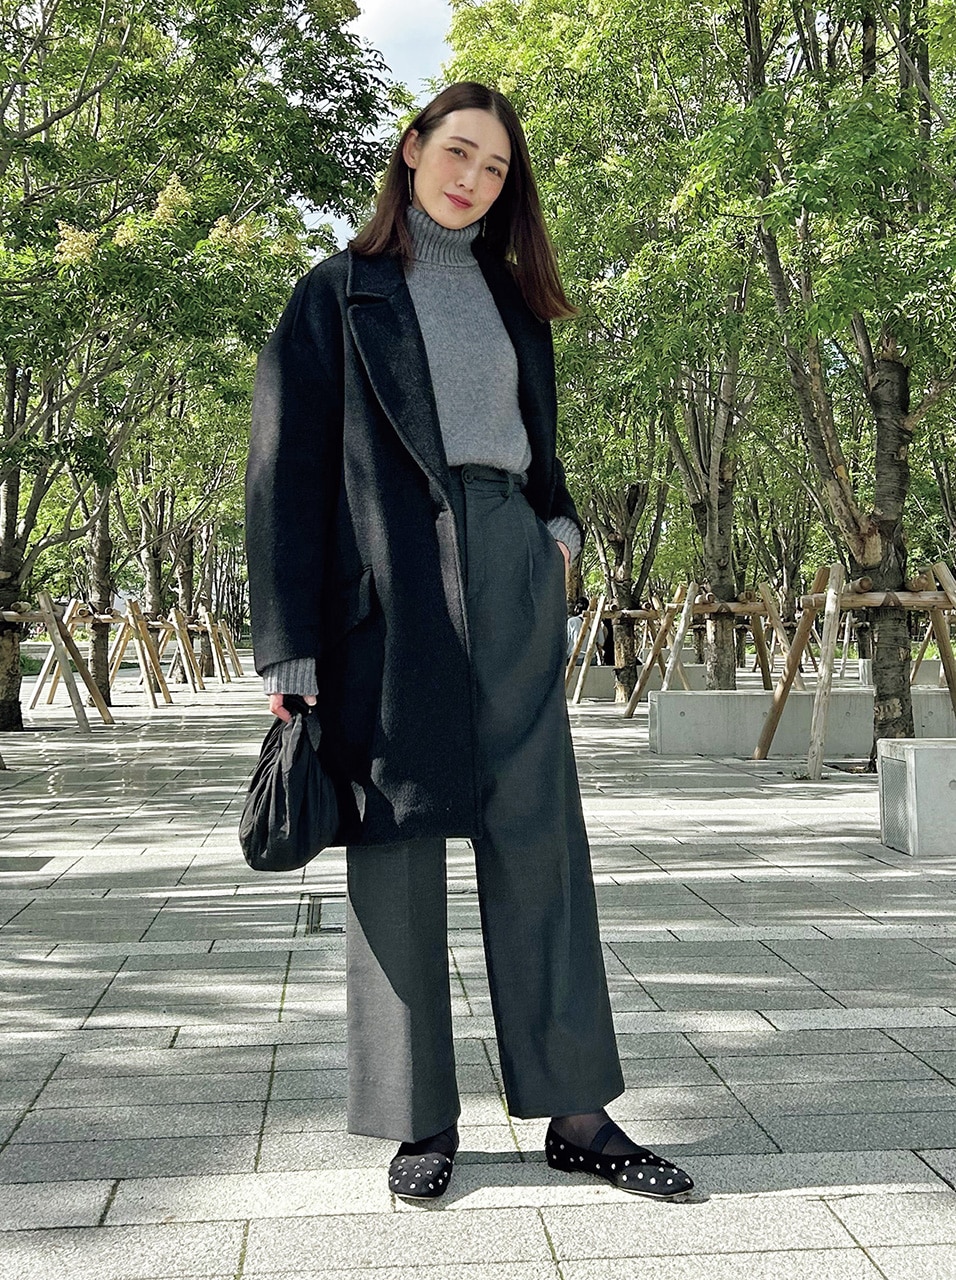 LEEキャラクター 大橋真代さん　Coat：ISABEL MARANT　Knit：INSCRIRE　Pants：AEWEN MATOPH　Bag：HELOYSE　Shoes：PIPPICHIC